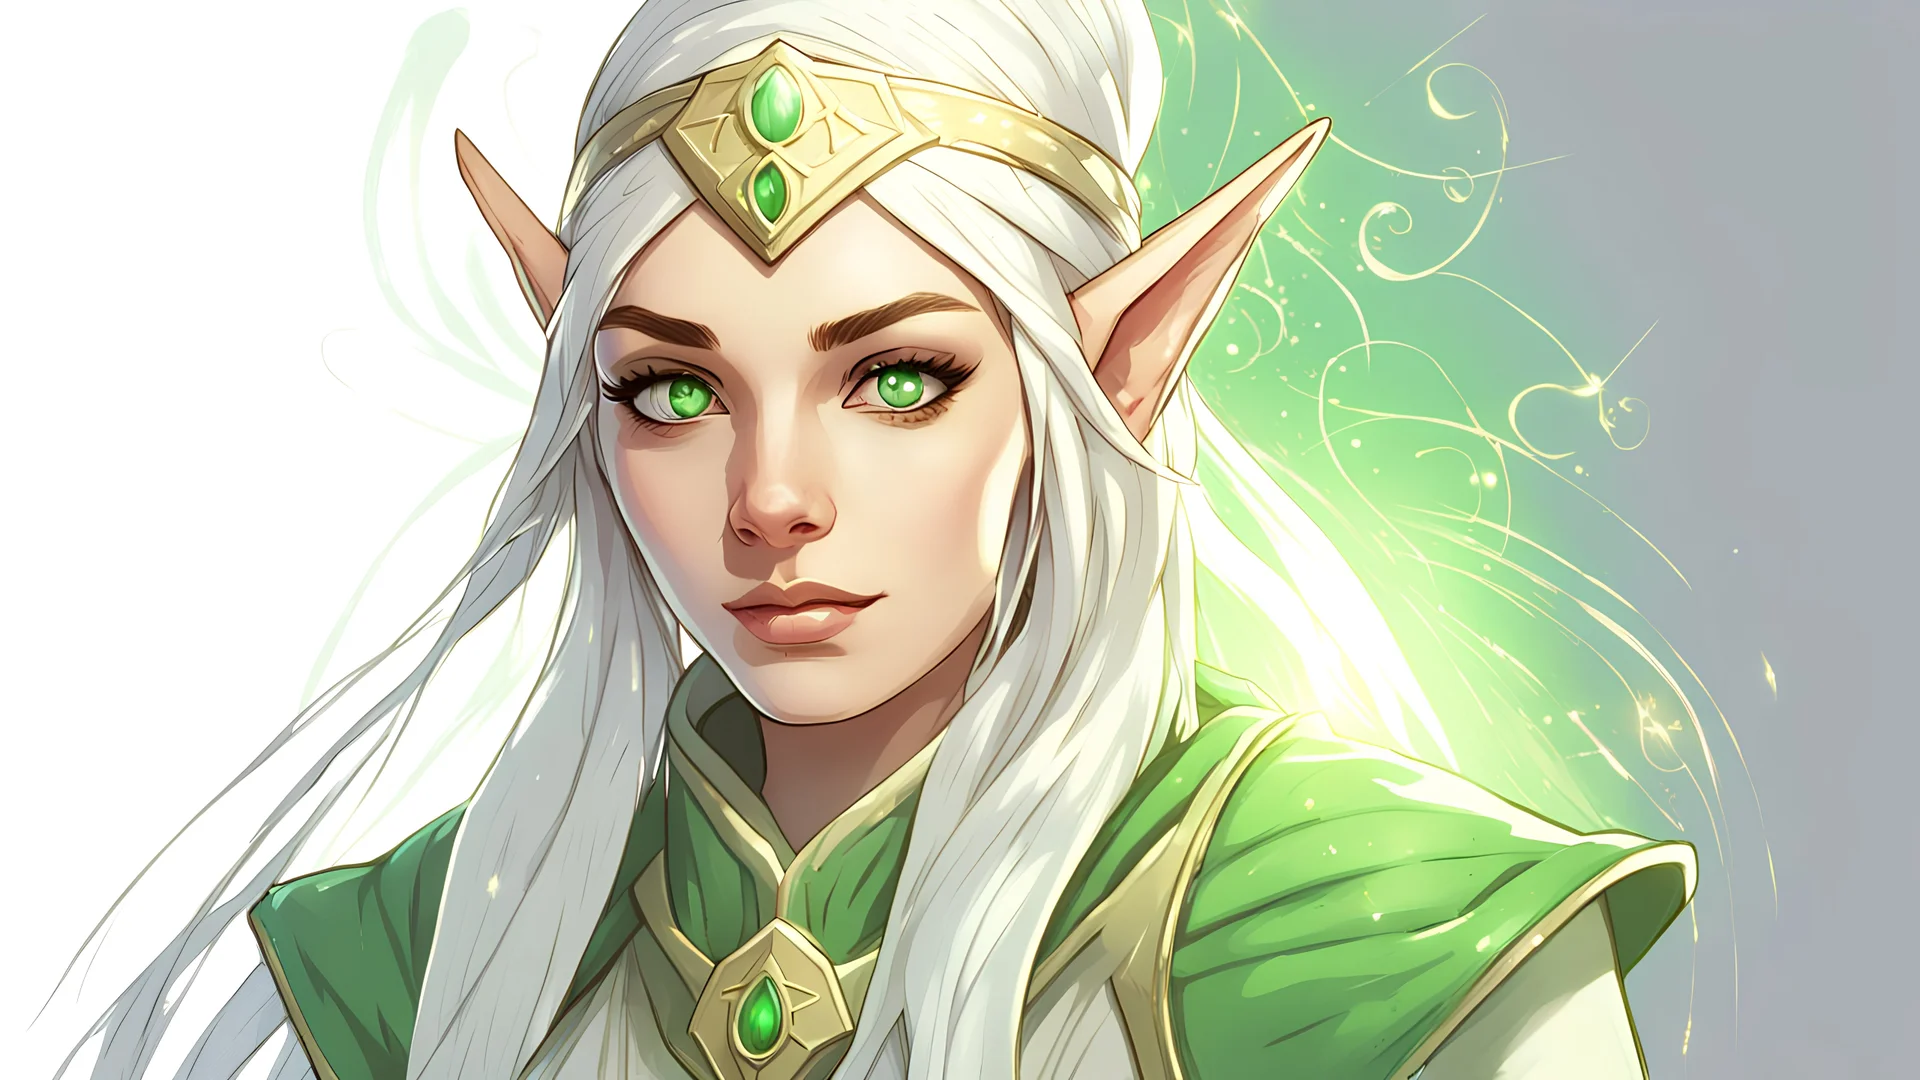 Generate a dungeons and dragons character portrait of a female elf who is a cleric of the moon with dark hair, tan skin, green eyes and is surrounded by holy light